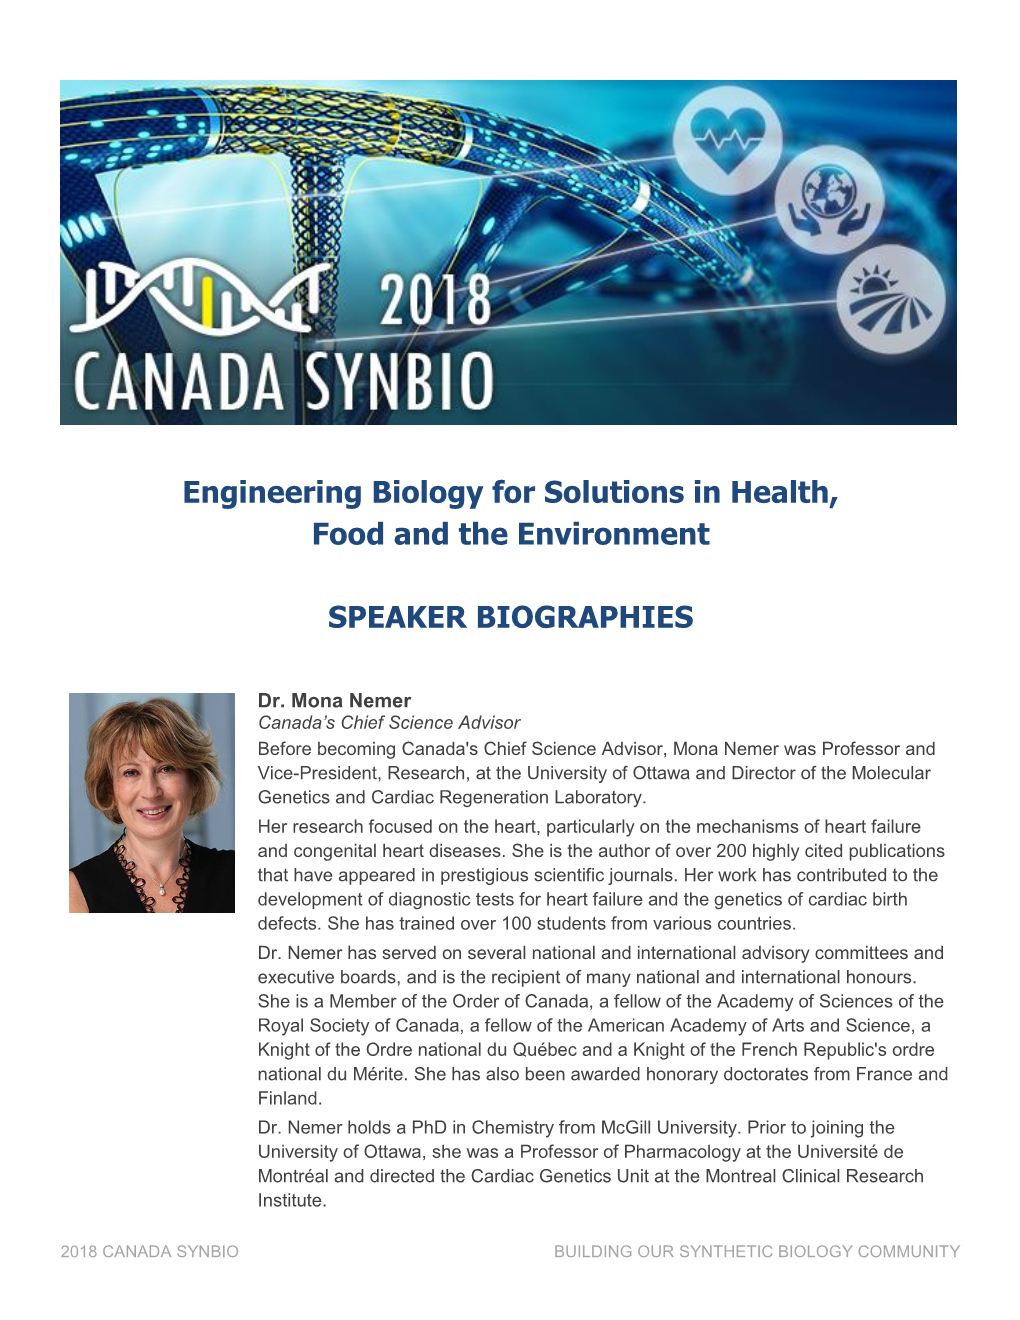 Engineering Biology for Solutions in Health, Food and the Environment